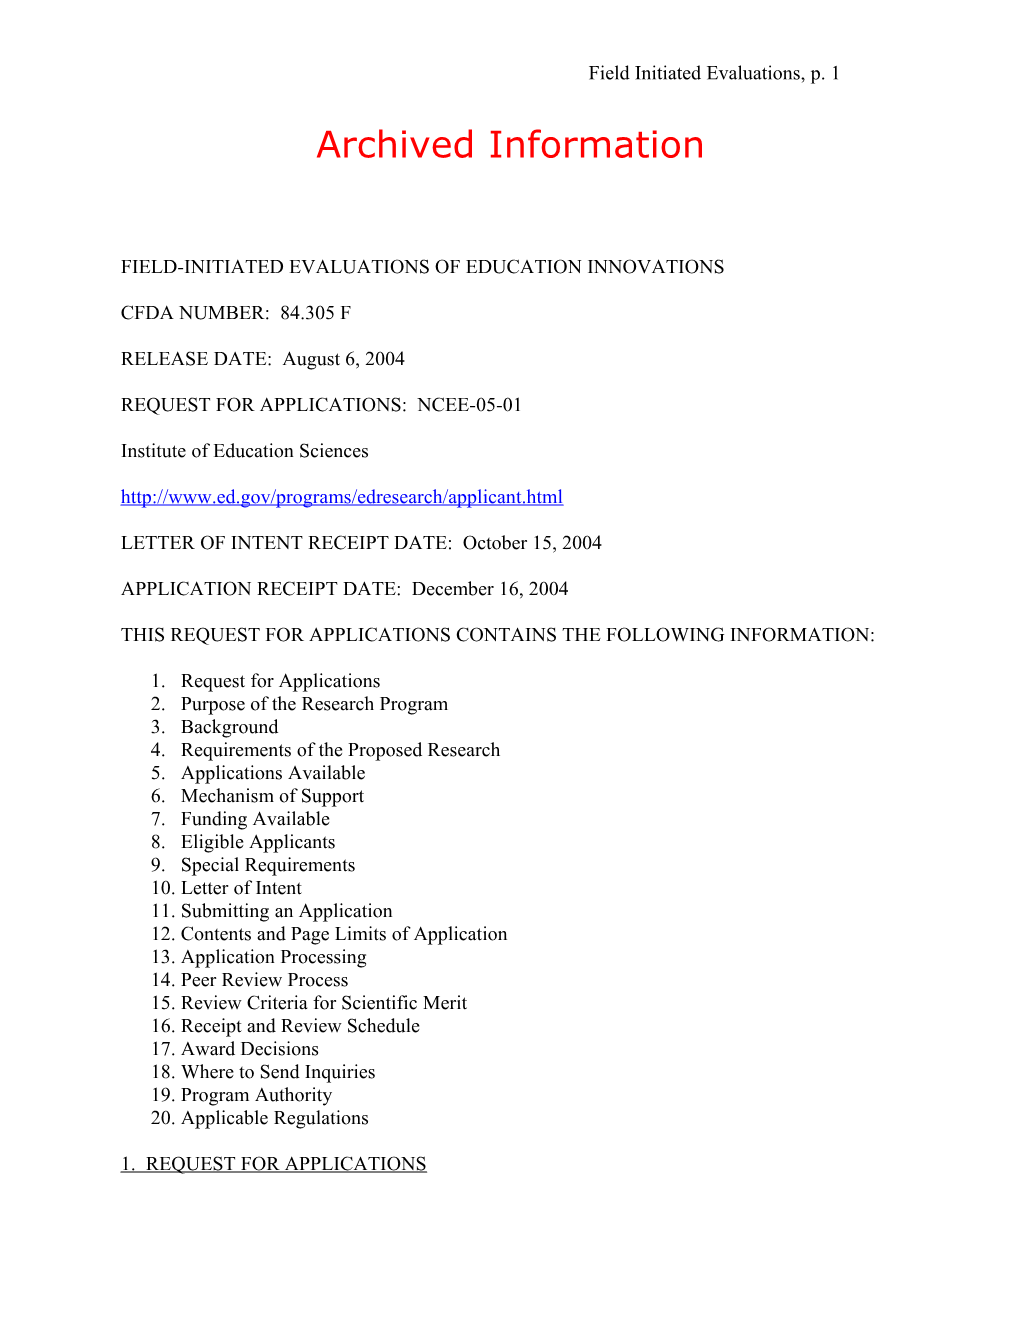 Archived: Request for Applications - Field-Initiated Evaluations of Education Innovations